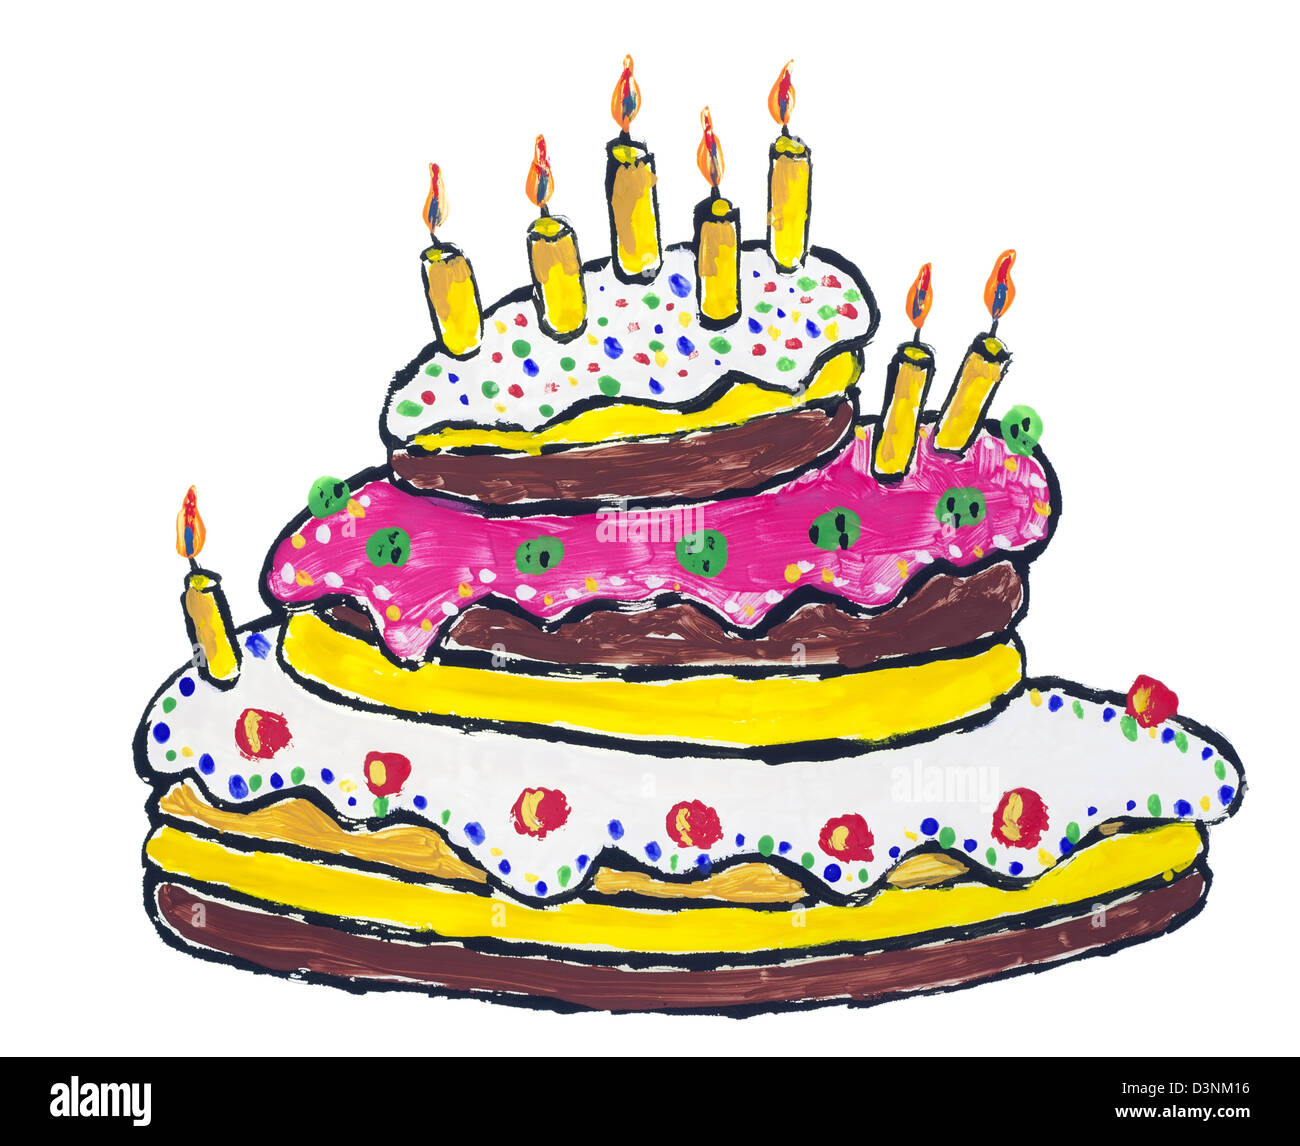 Big Birthday Cake With Burning Candles Abstract Isolated Children Stock Photo Alamy